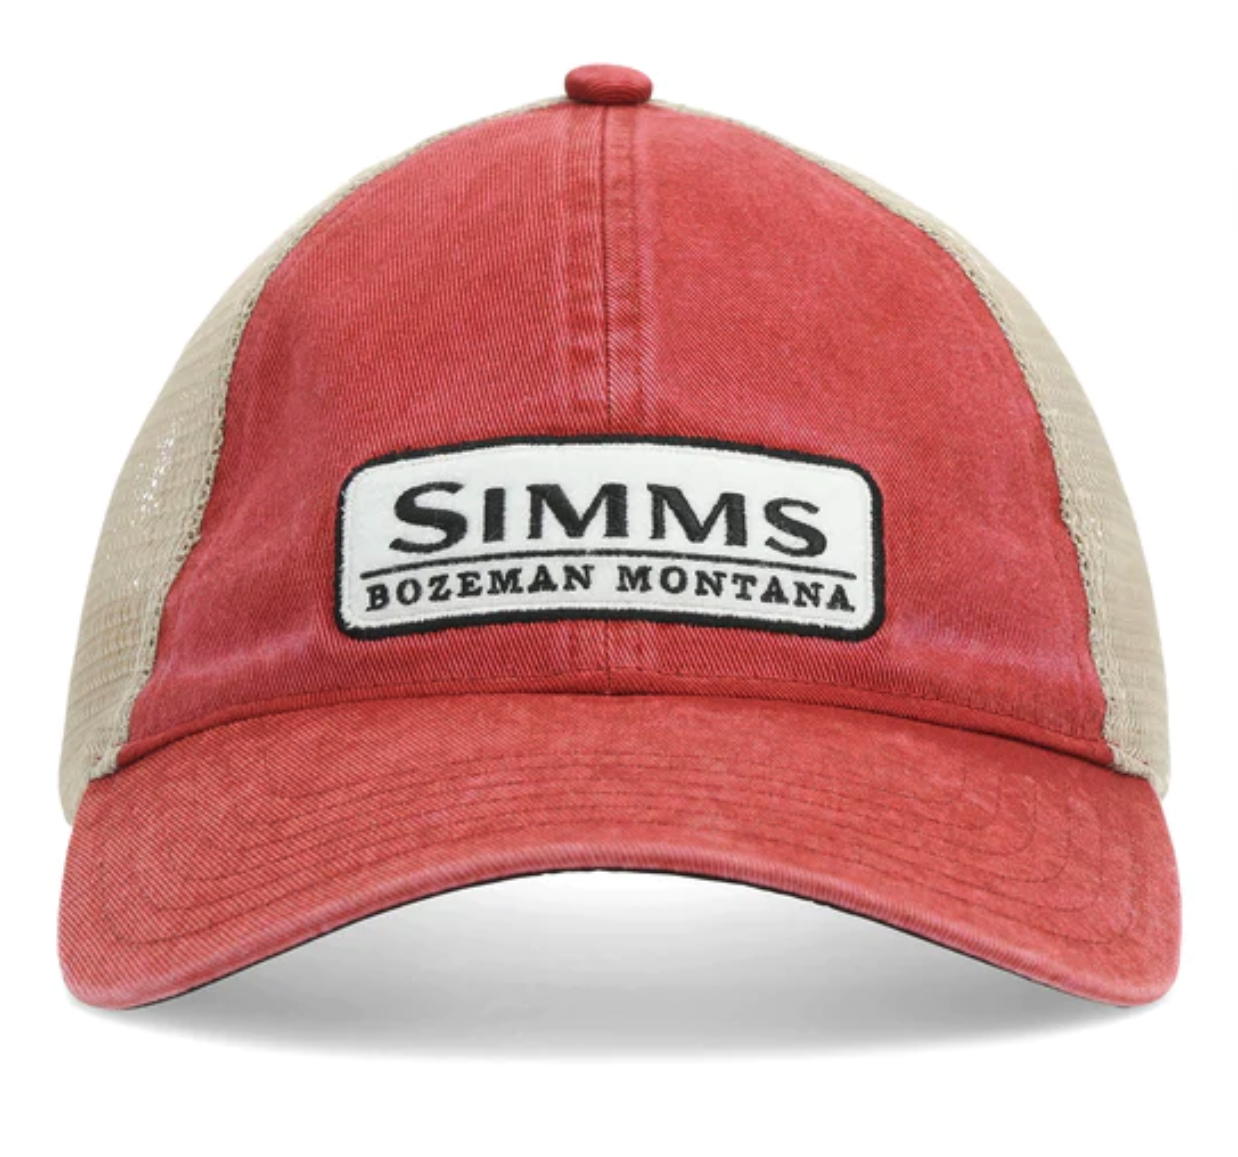 Simms Heritage Trucker Hat is a classic fly fishing trucker hat that is great on and off the water.